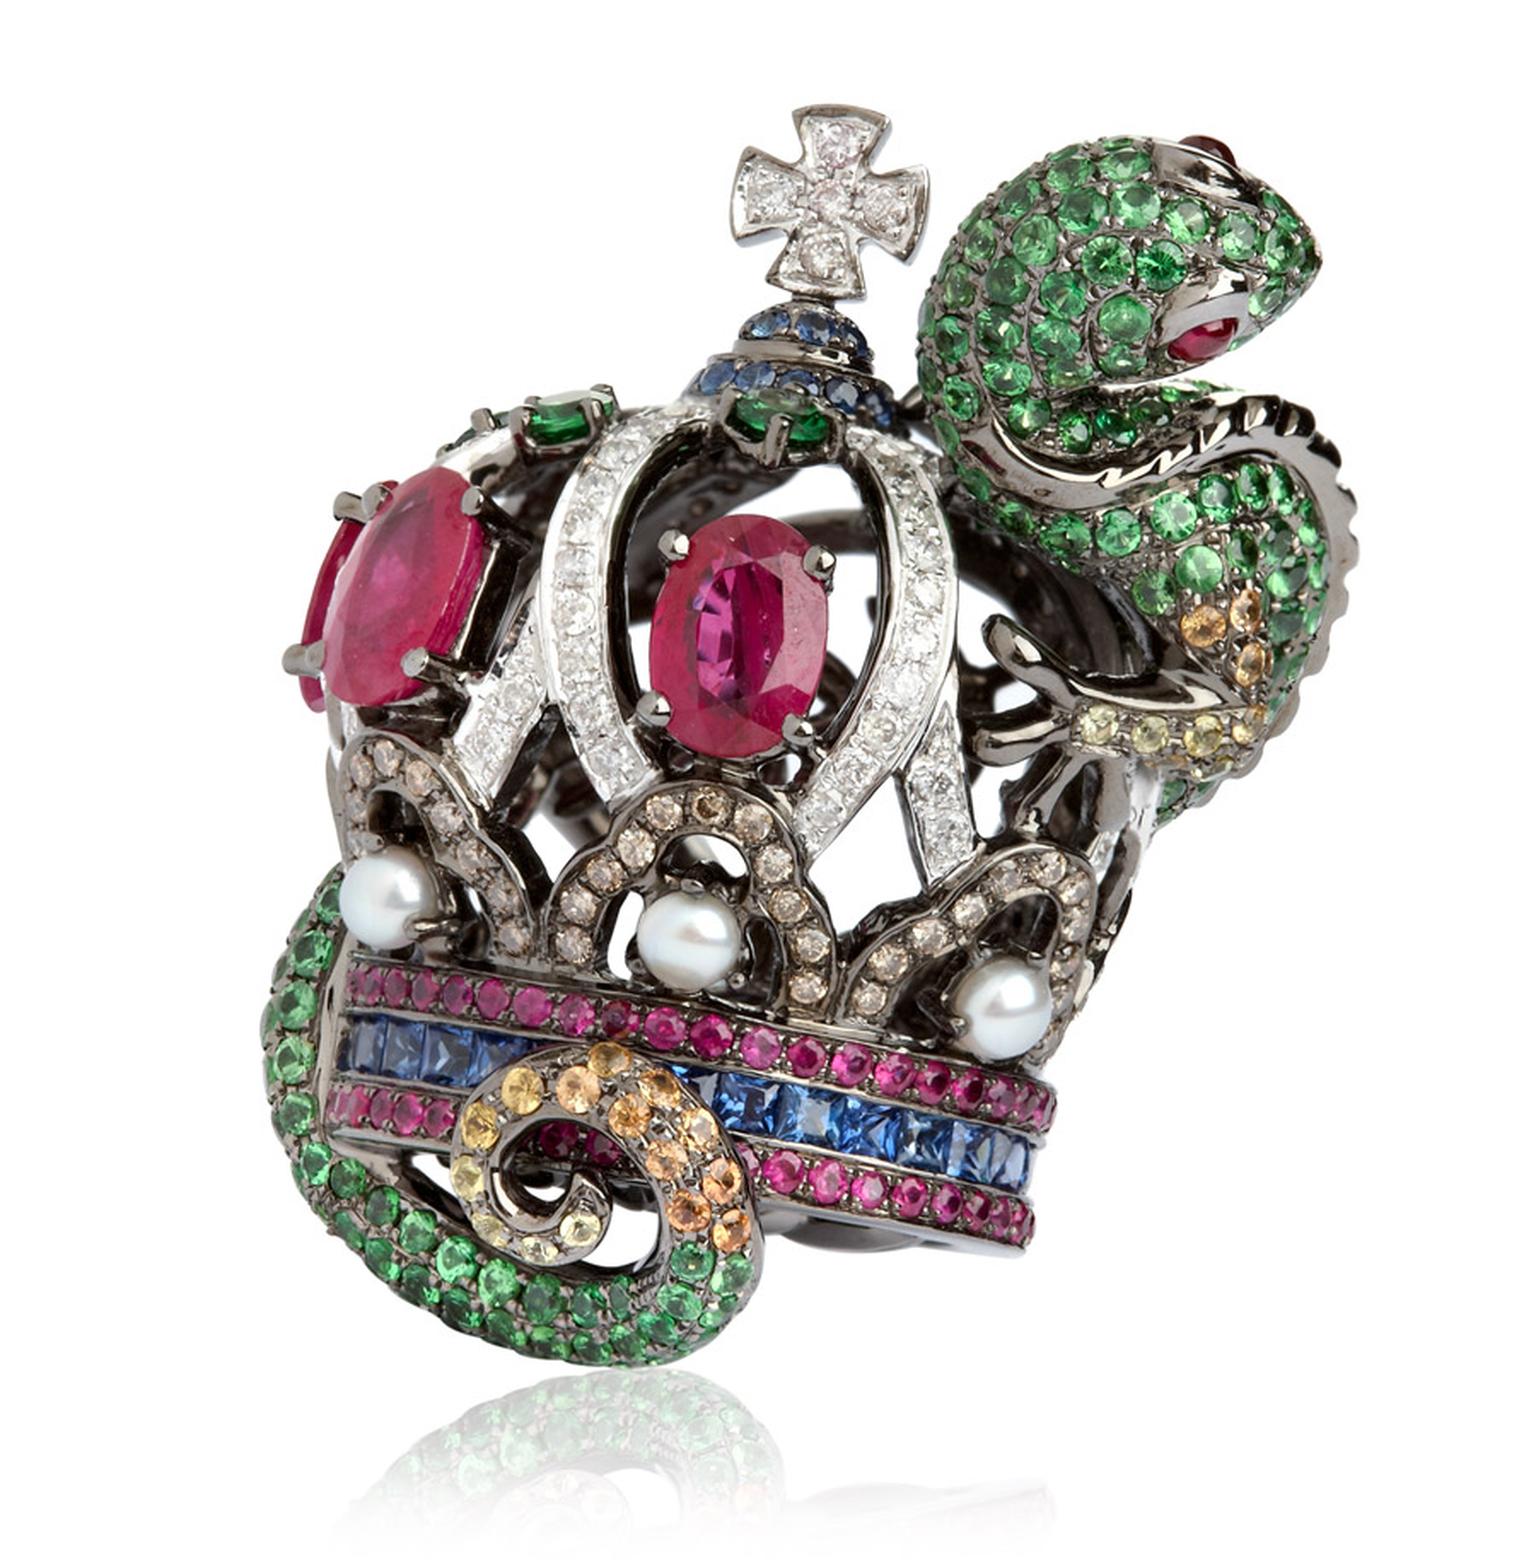 Wendy-Yue-Fantasie-Jubilee-18ct-white-gold,diamond,sapphire,garnet-and-ruby-Lizard-ring-by-Wendy-Yue-for-Annoushka_02a.jpg